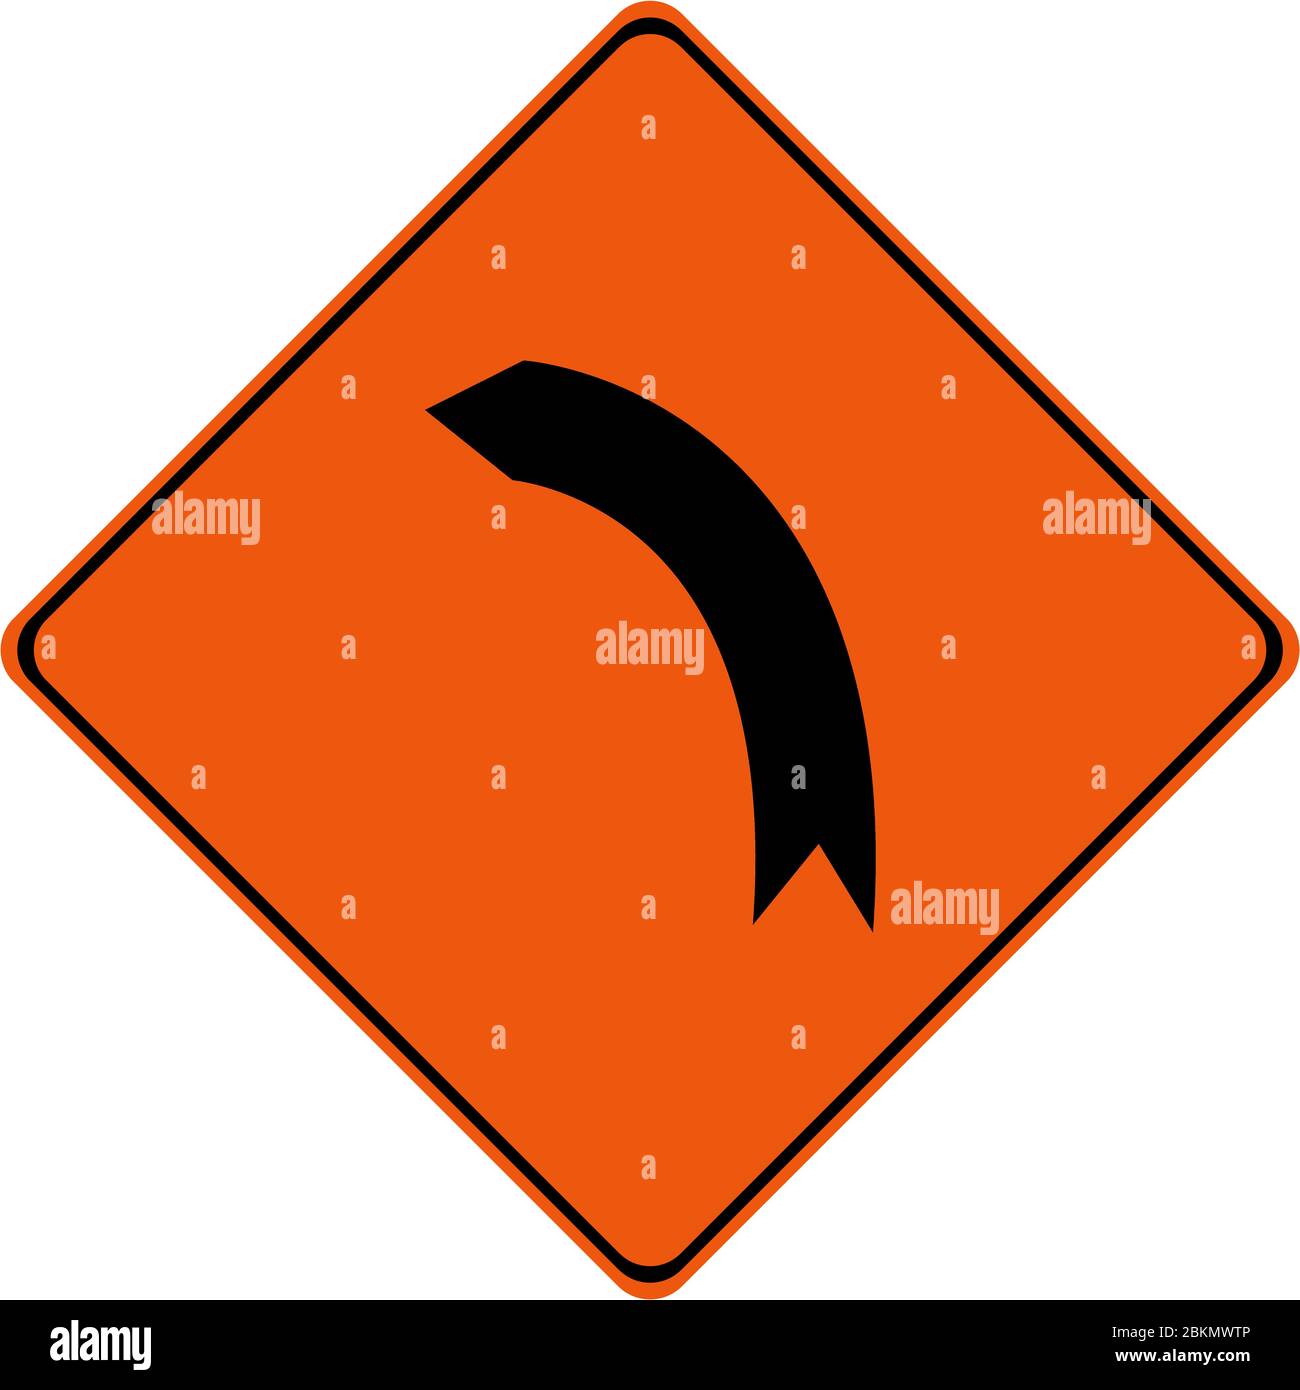 Warning sign with left bend symbol Stock Photo